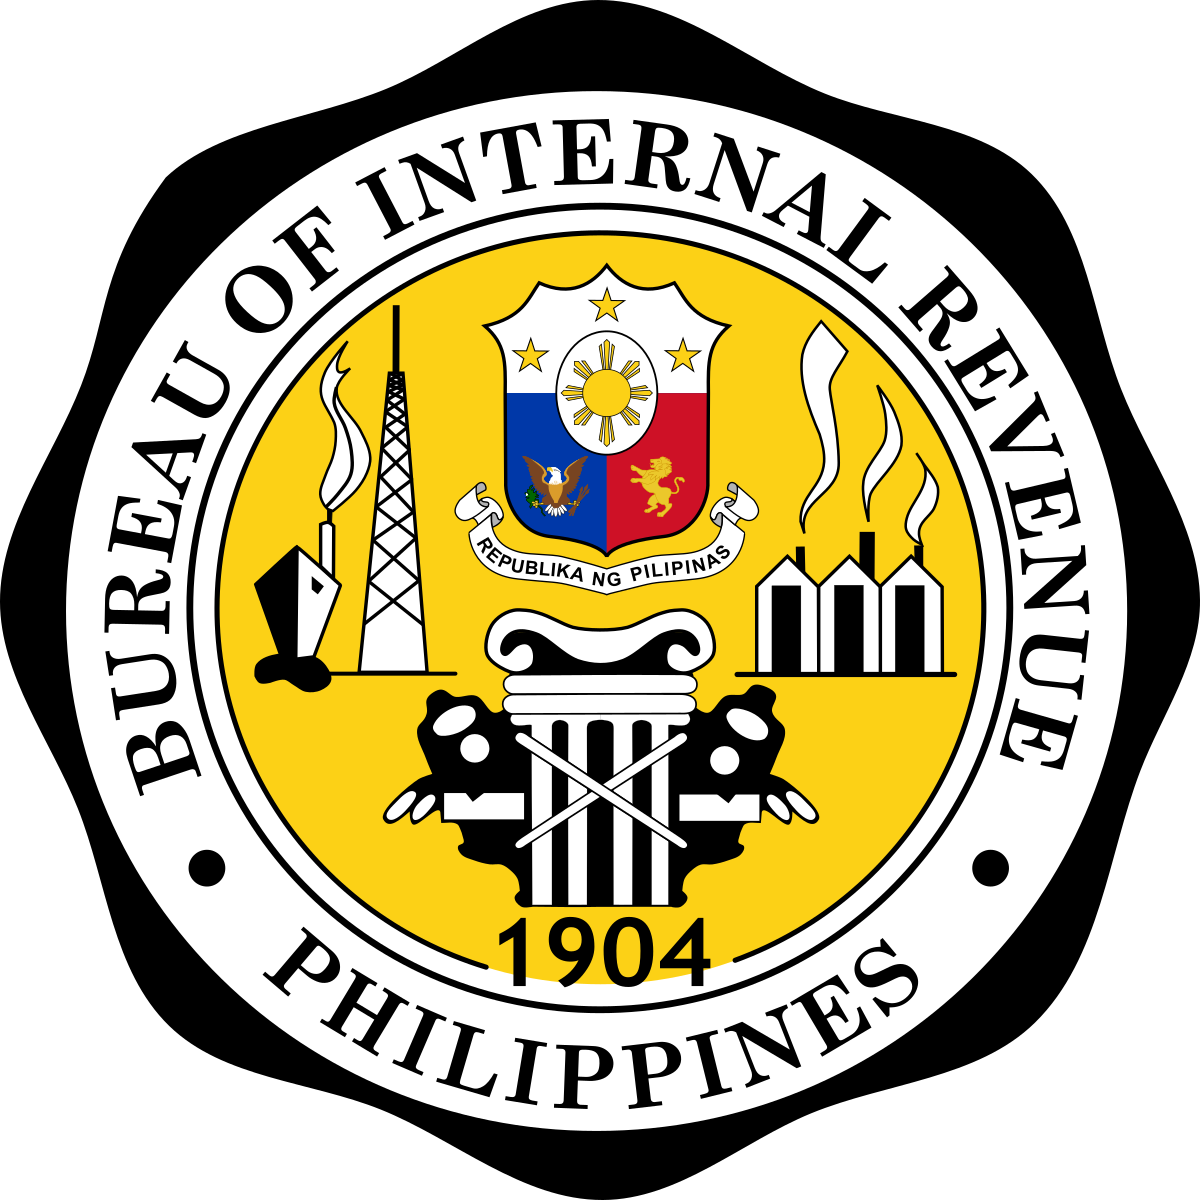 Is That An X Over The Four Pillars At The Bottom, Just - Philippines Coat Of Arms (1200x1200)